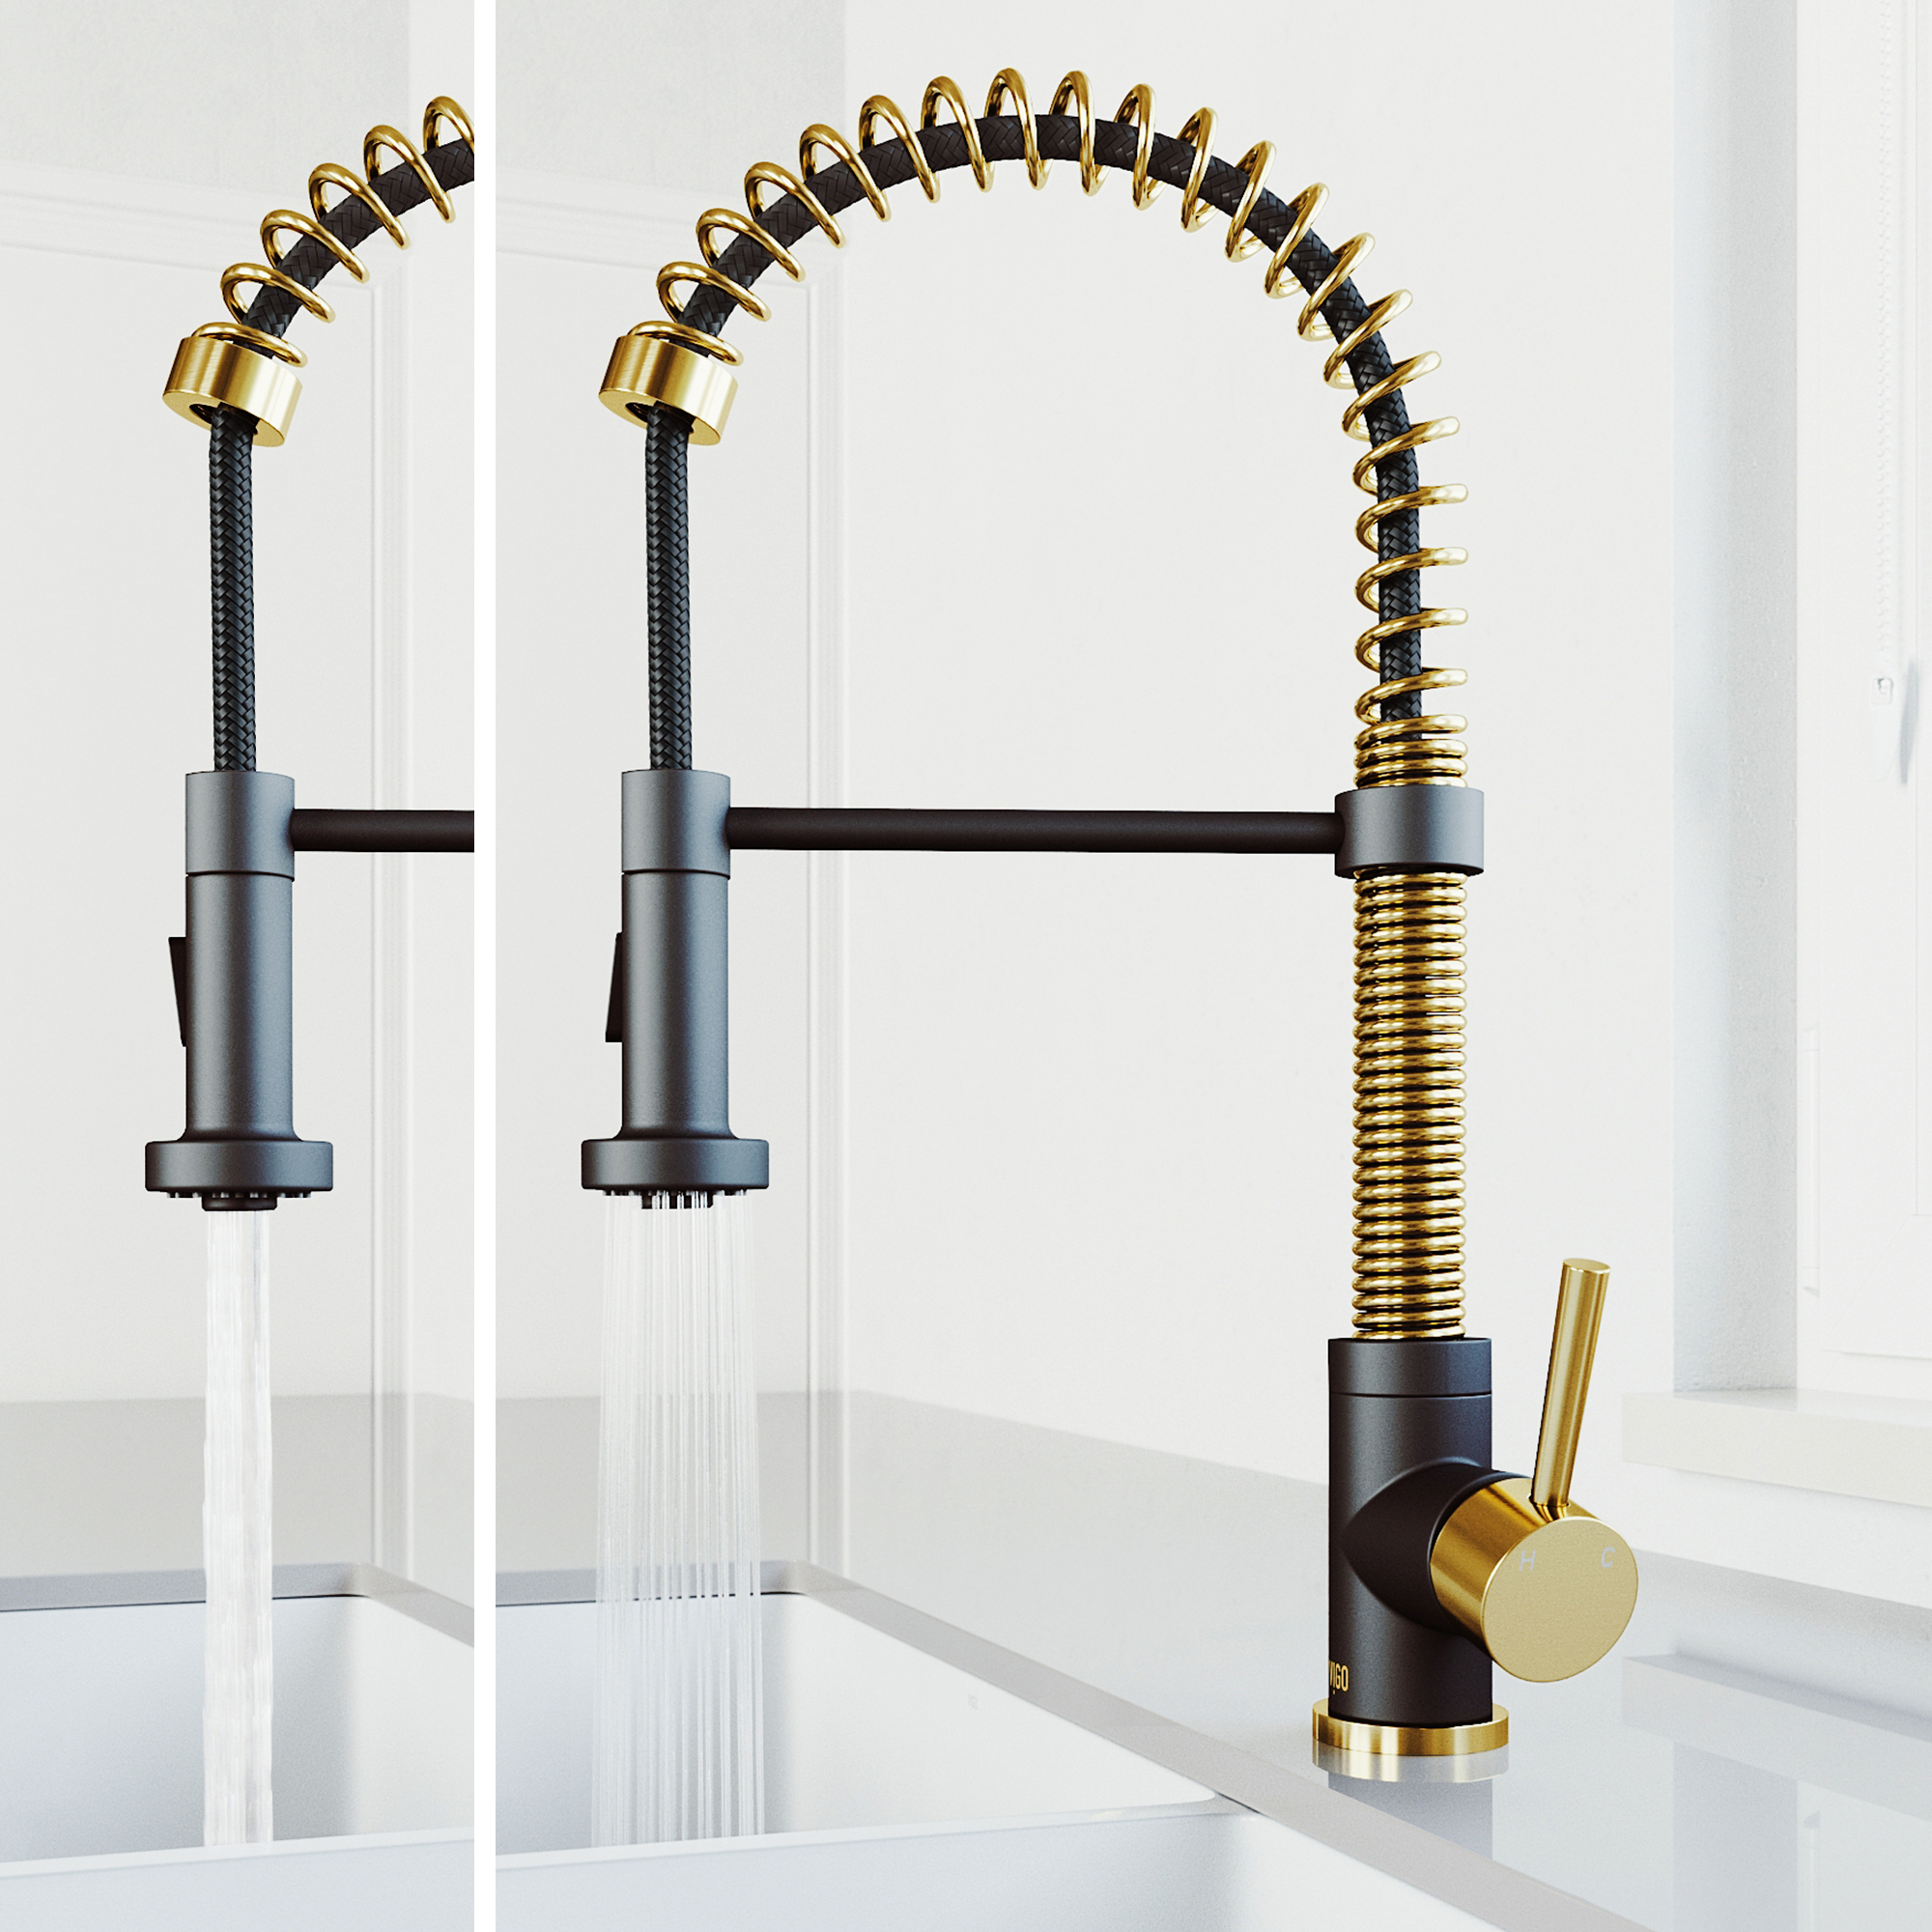 VIGO Edison Single Handle Pull-Down Sprayer Kitchen Faucet in Matte Brushed Gold and Matte Black - image 2 of 10